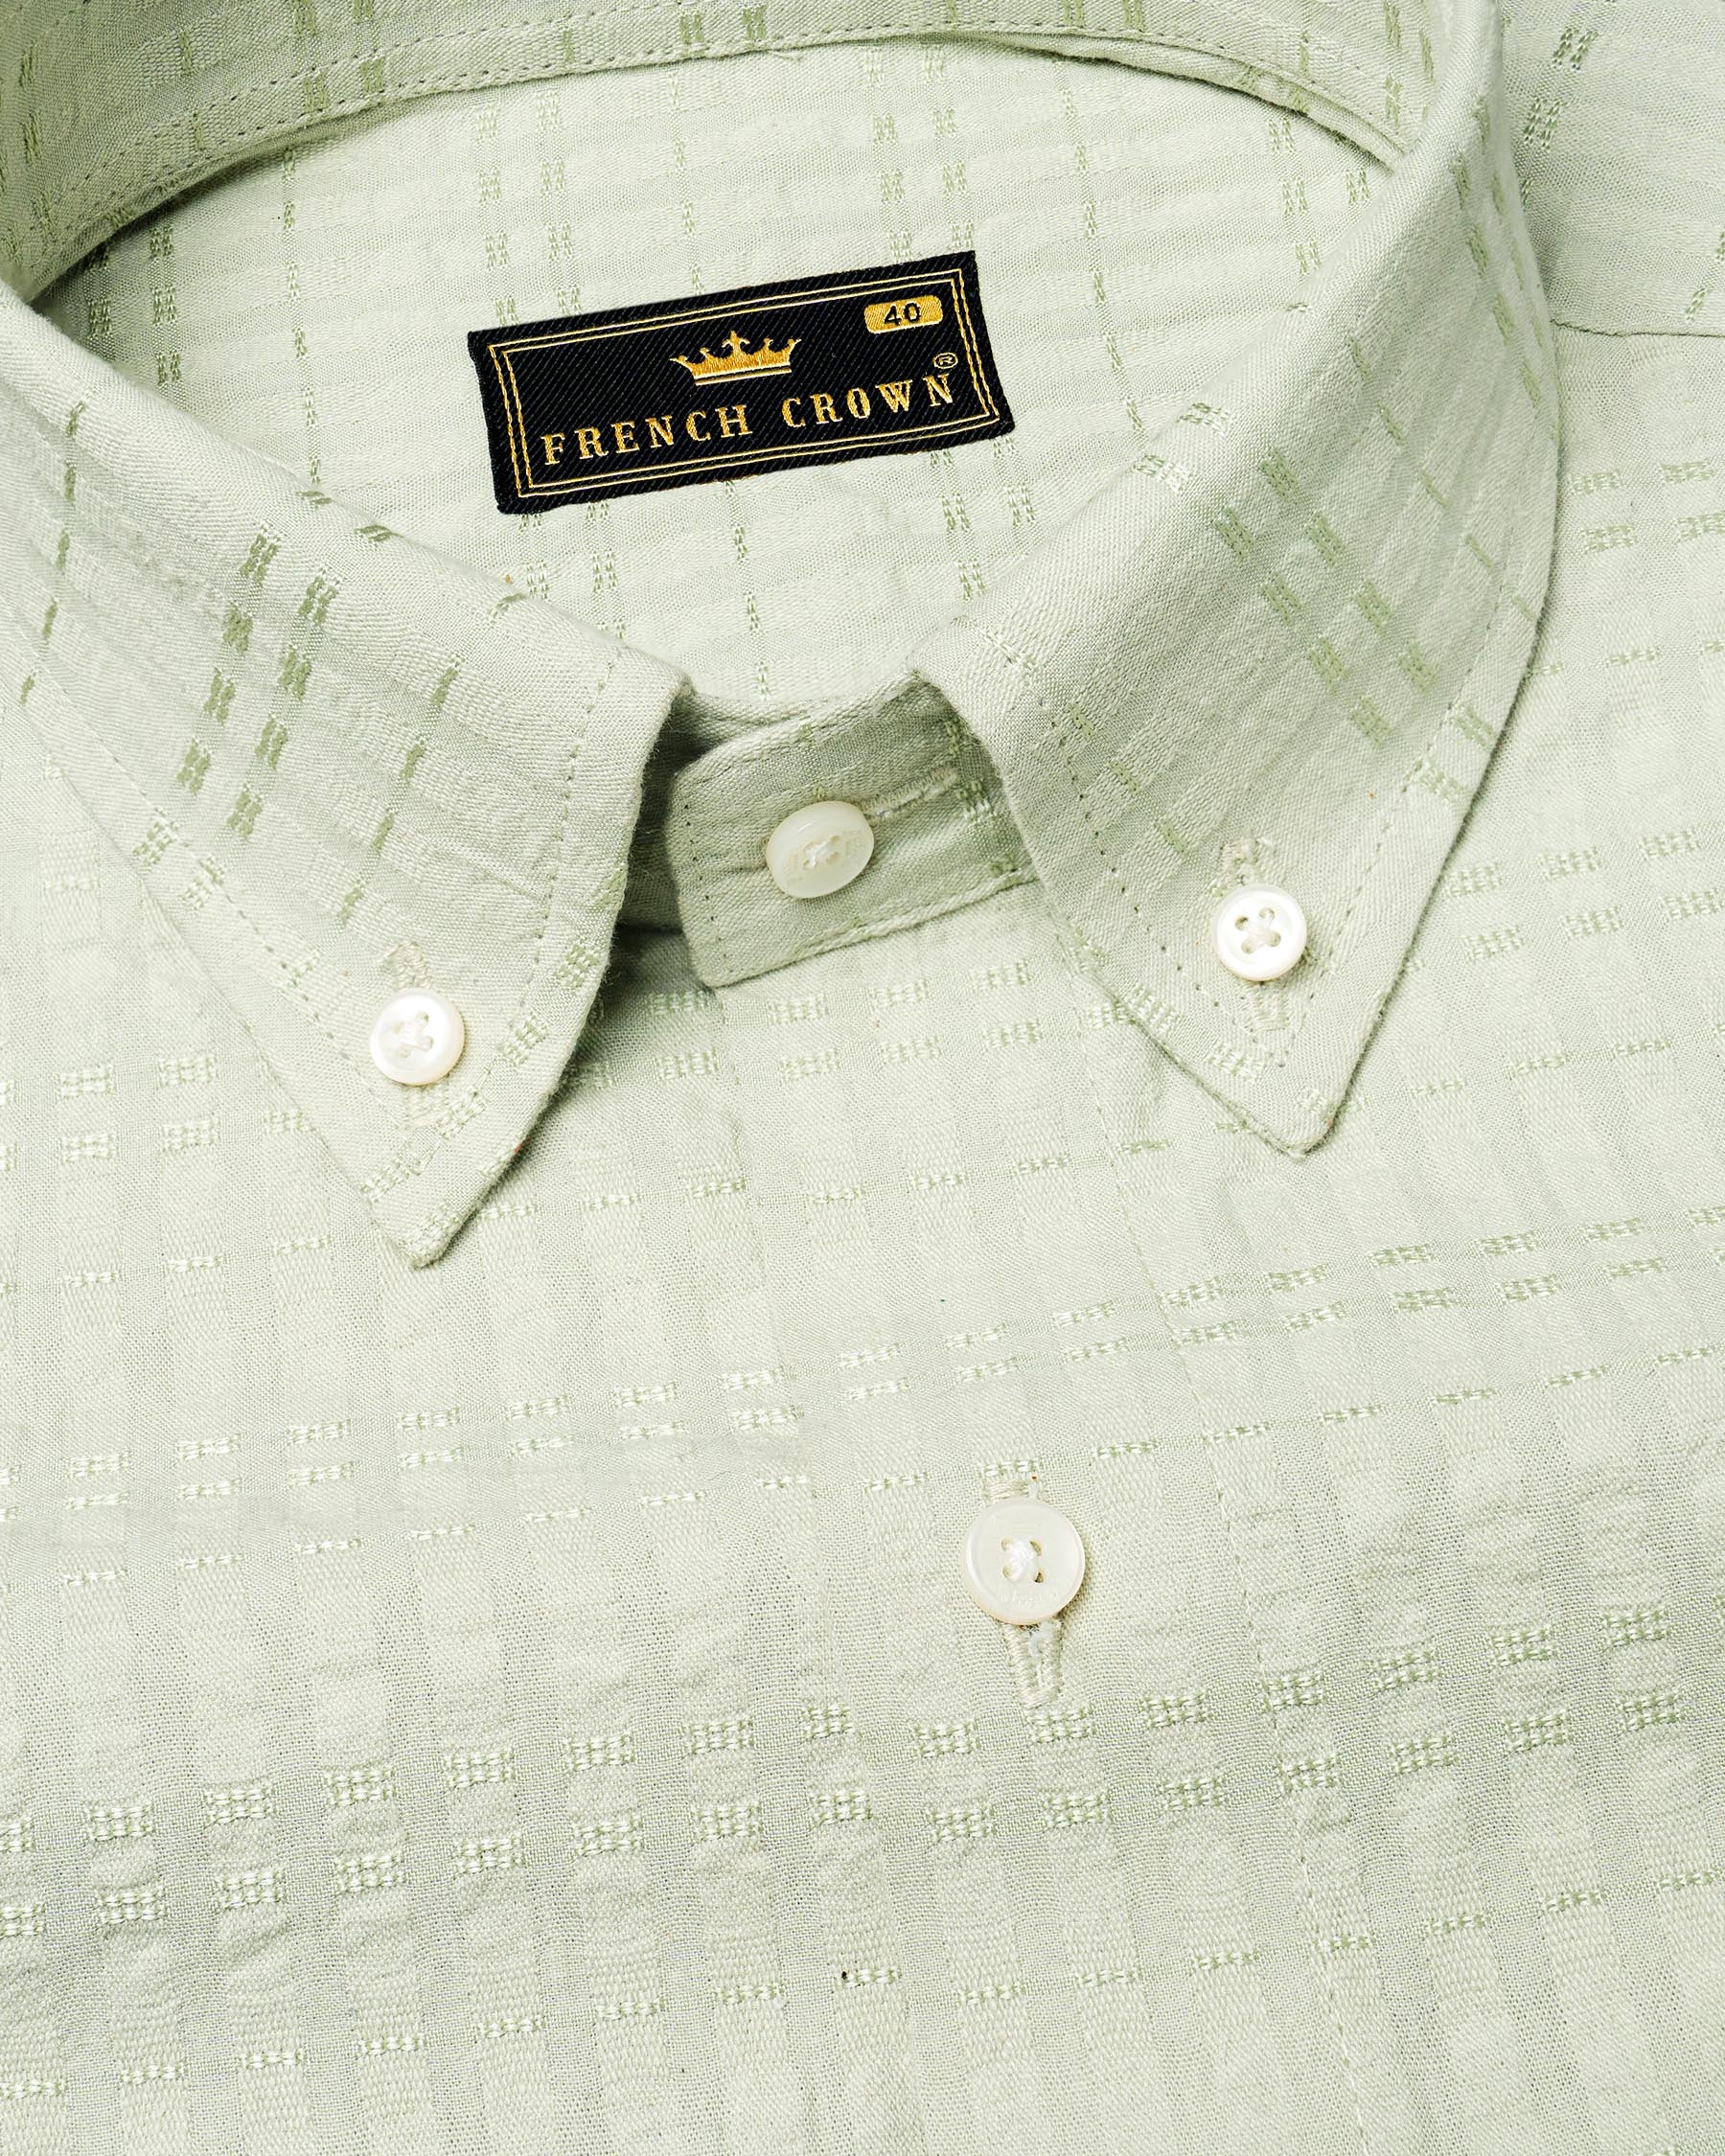 Pearl Bush with Pale Oyster Striped Seersucker Giza Cotton Shirt 7013-BD-38,7013-BD-38,7013-BD-39,7013-BD-39,7013-BD-40,7013-BD-40,7013-BD-42,7013-BD-42,7013-BD-44,7013-BD-44,7013-BD-46,7013-BD-46,7013-BD-48,7013-BD-48,7013-BD-50,7013-BD-50,7013-BD-52,7013-BD-52 